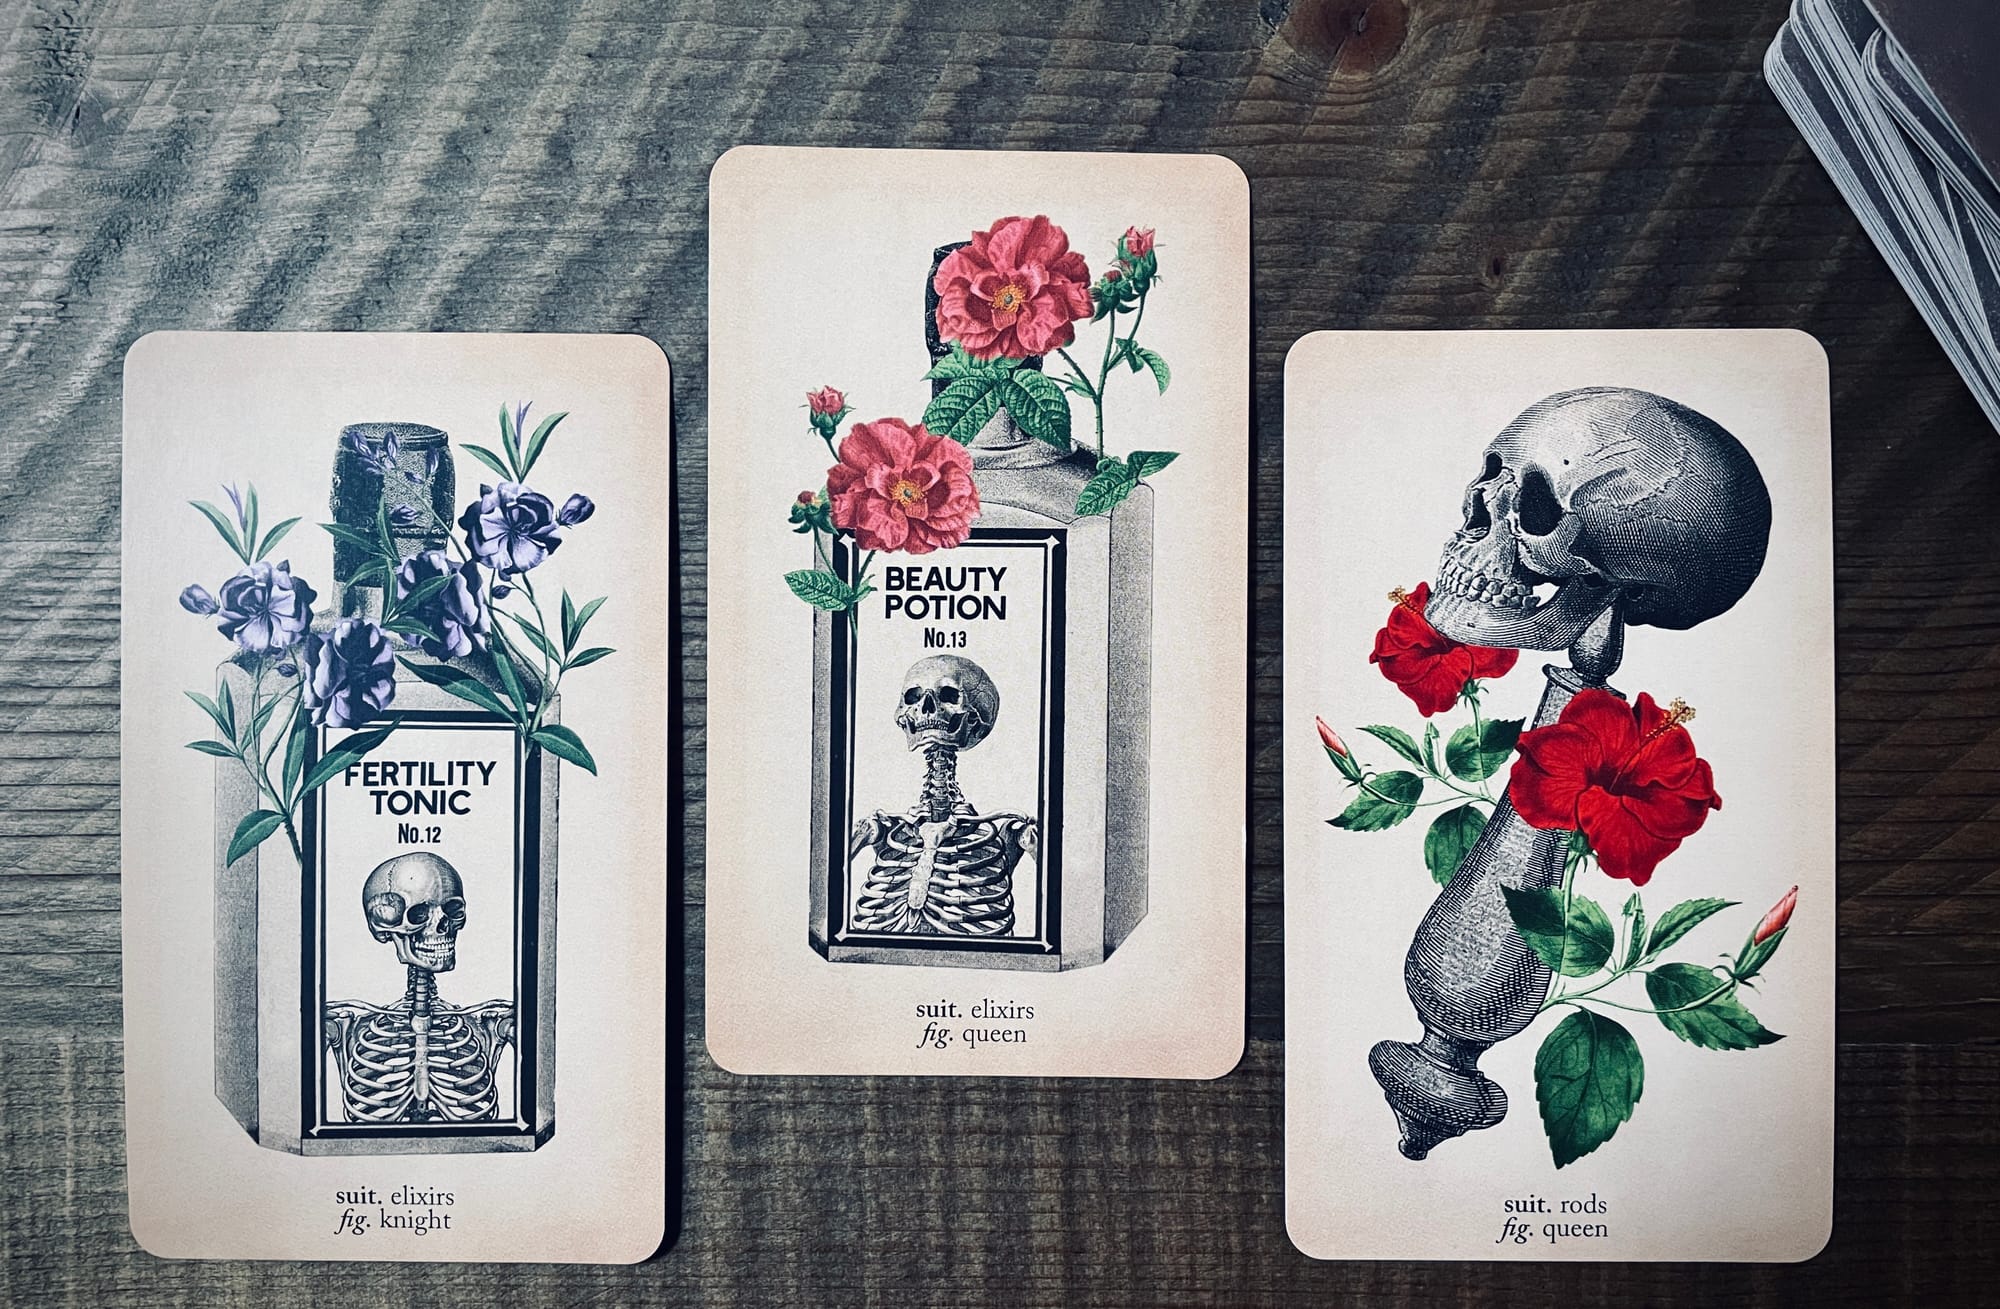 knight of elixirs, queen of elixirs, and queen of rods from the antique anatomy tarot